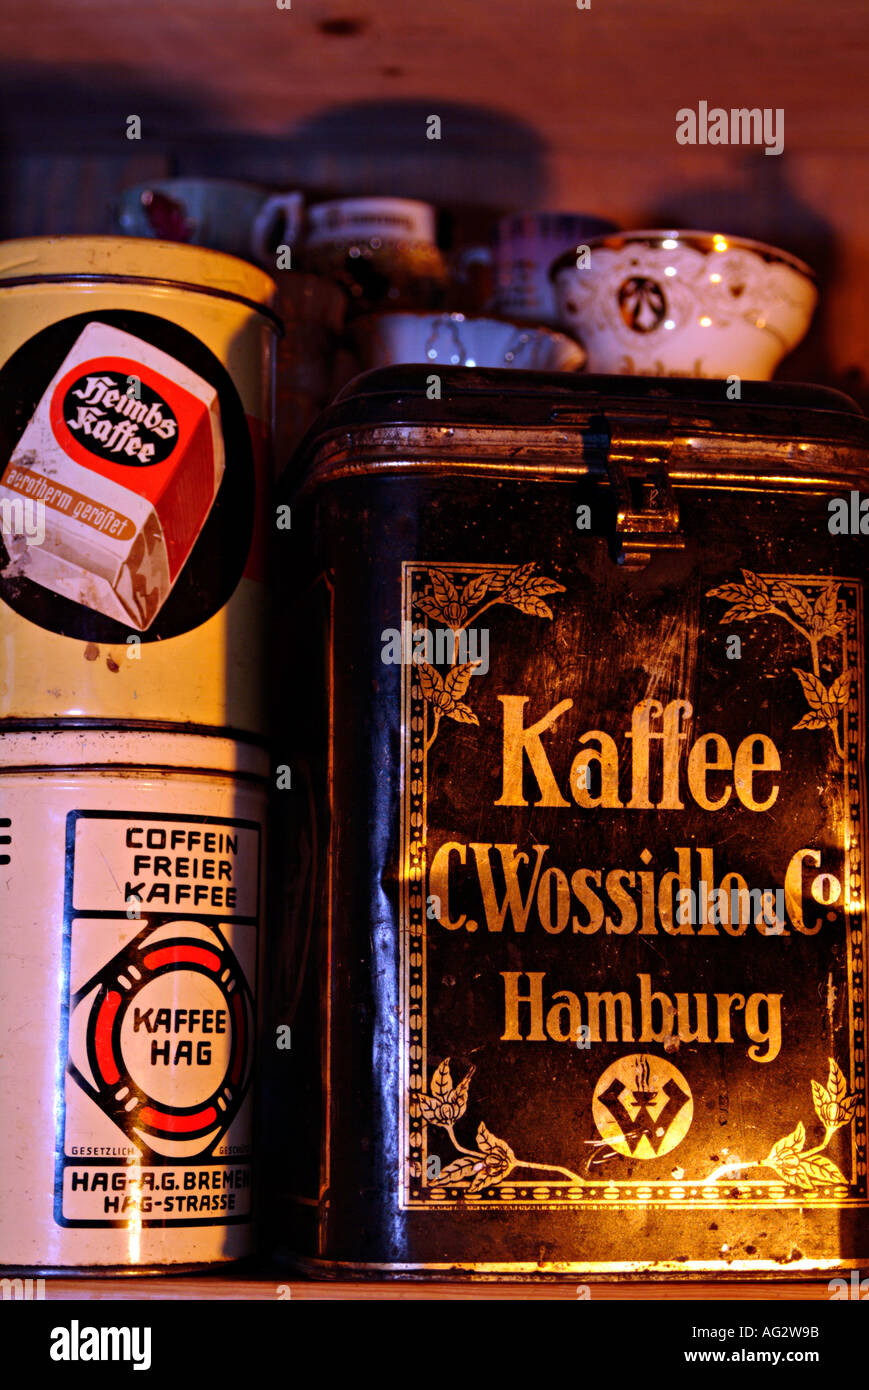 old coffee tins cans with old german language Stock Photo